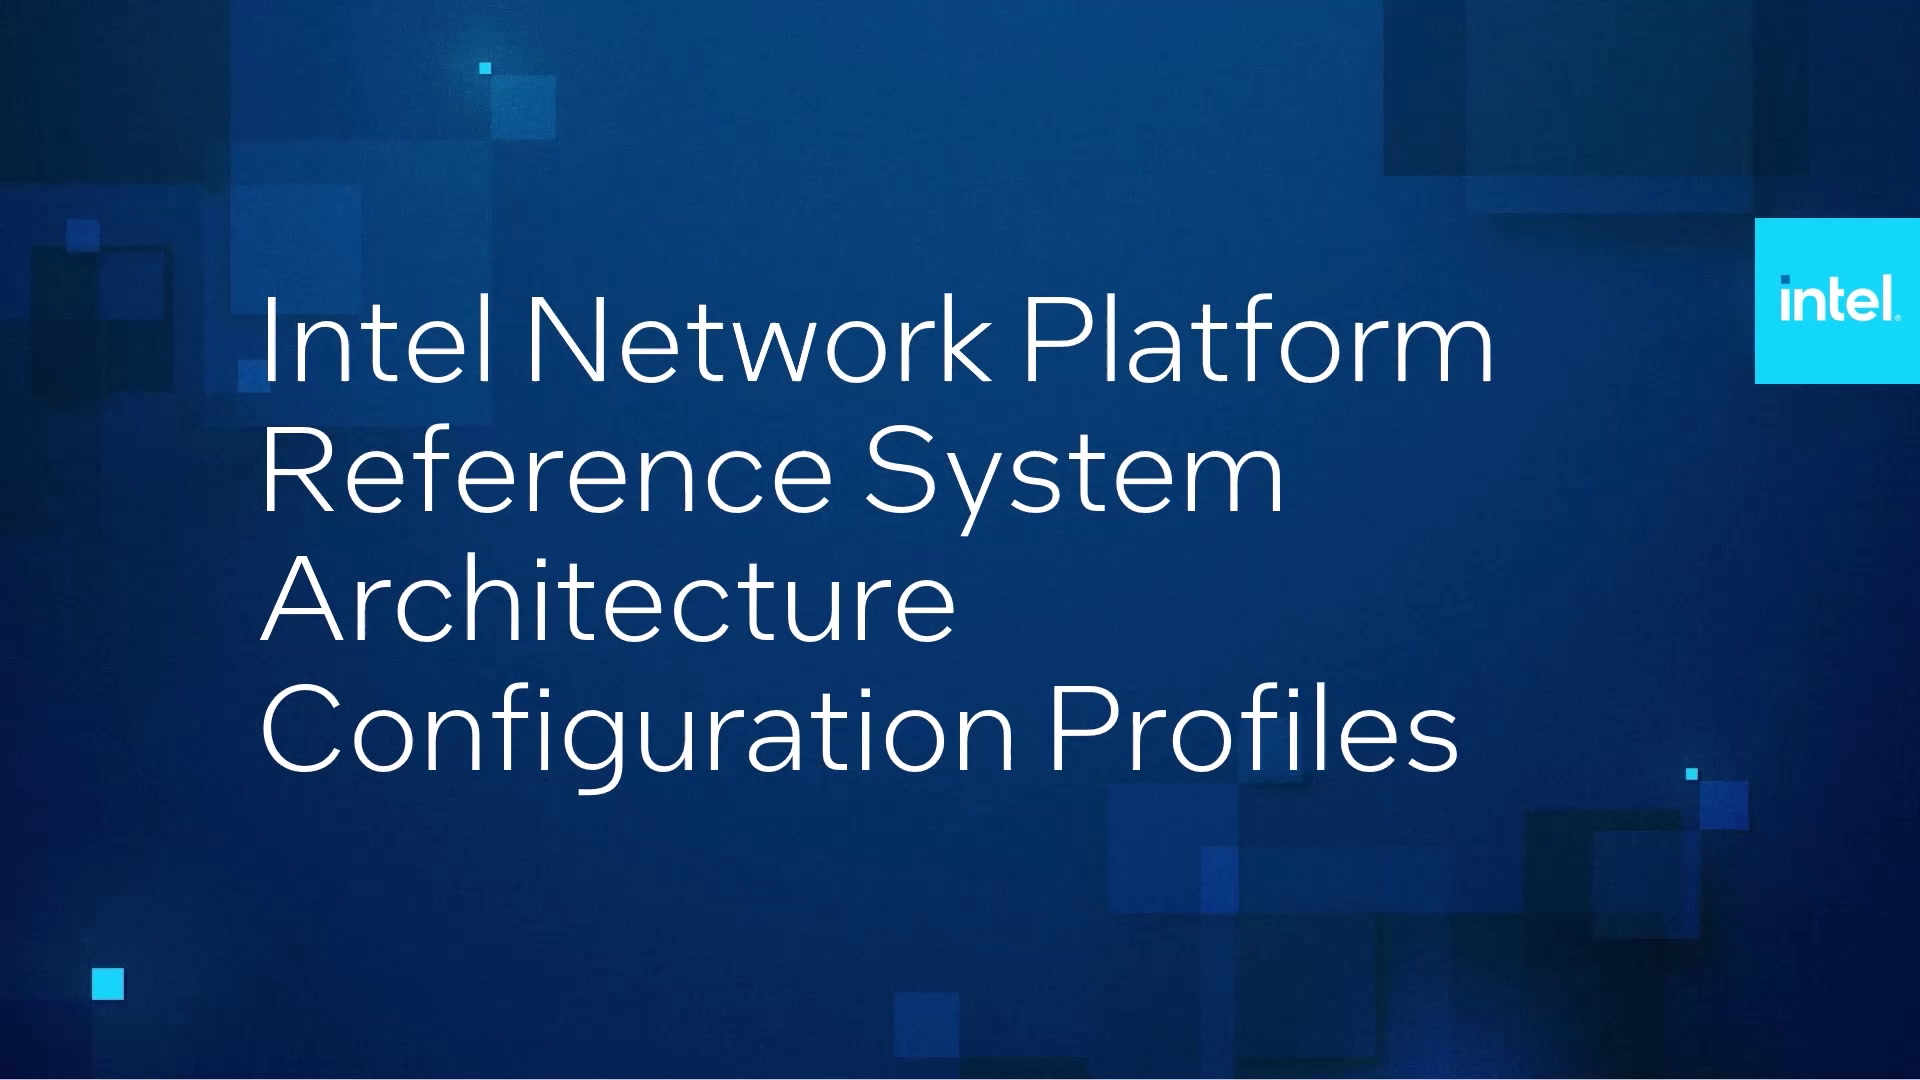 Chapter 1: Introduction to Network Platform Reference System Architecture Configuration Profiles 